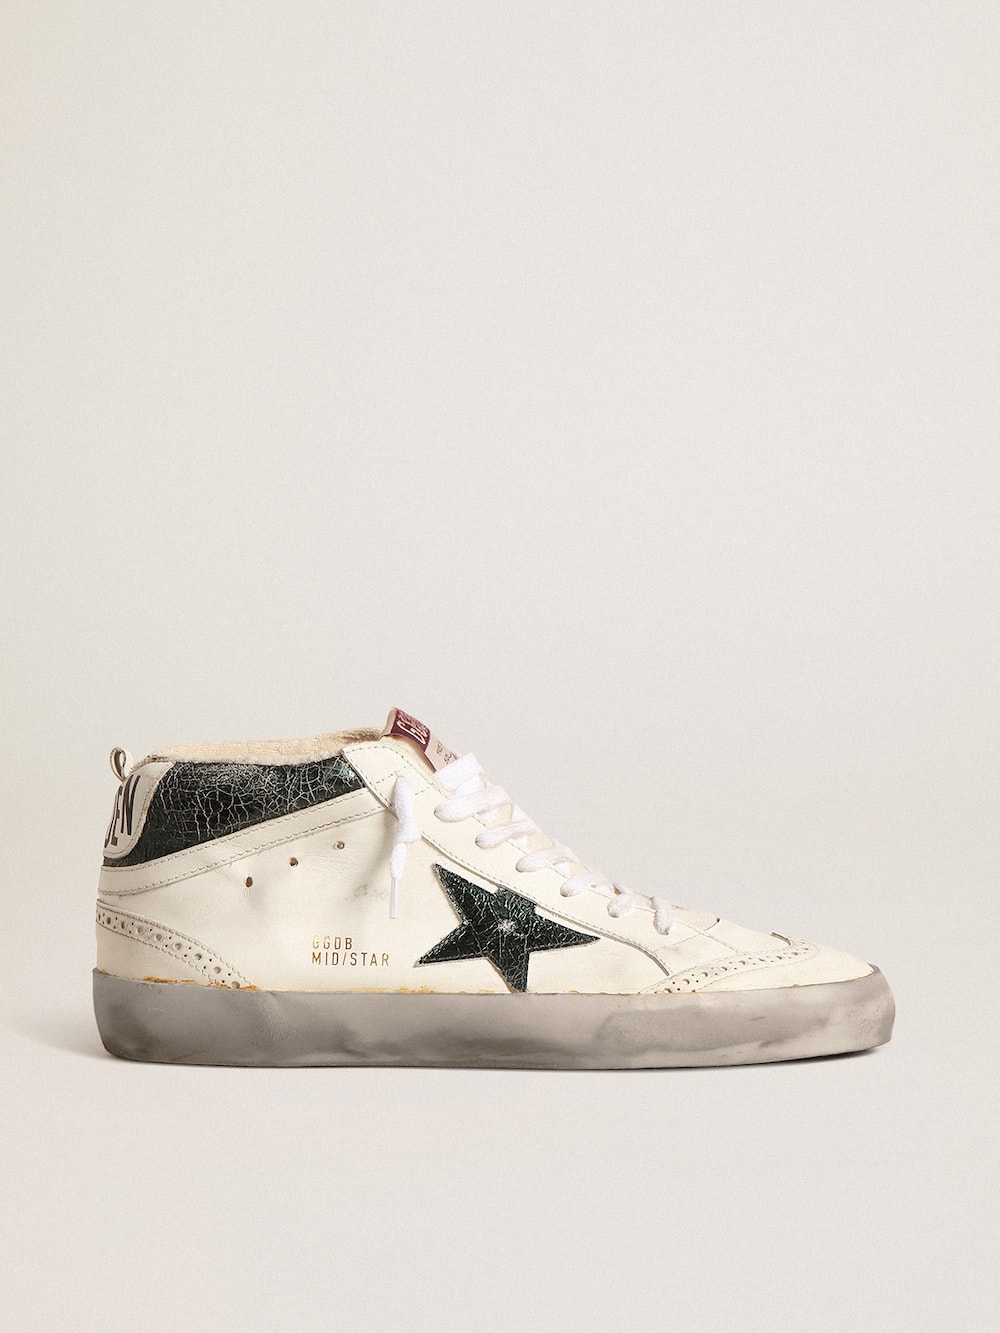 Golden Goose - Mid Star with green metallic leather star and white flash in 